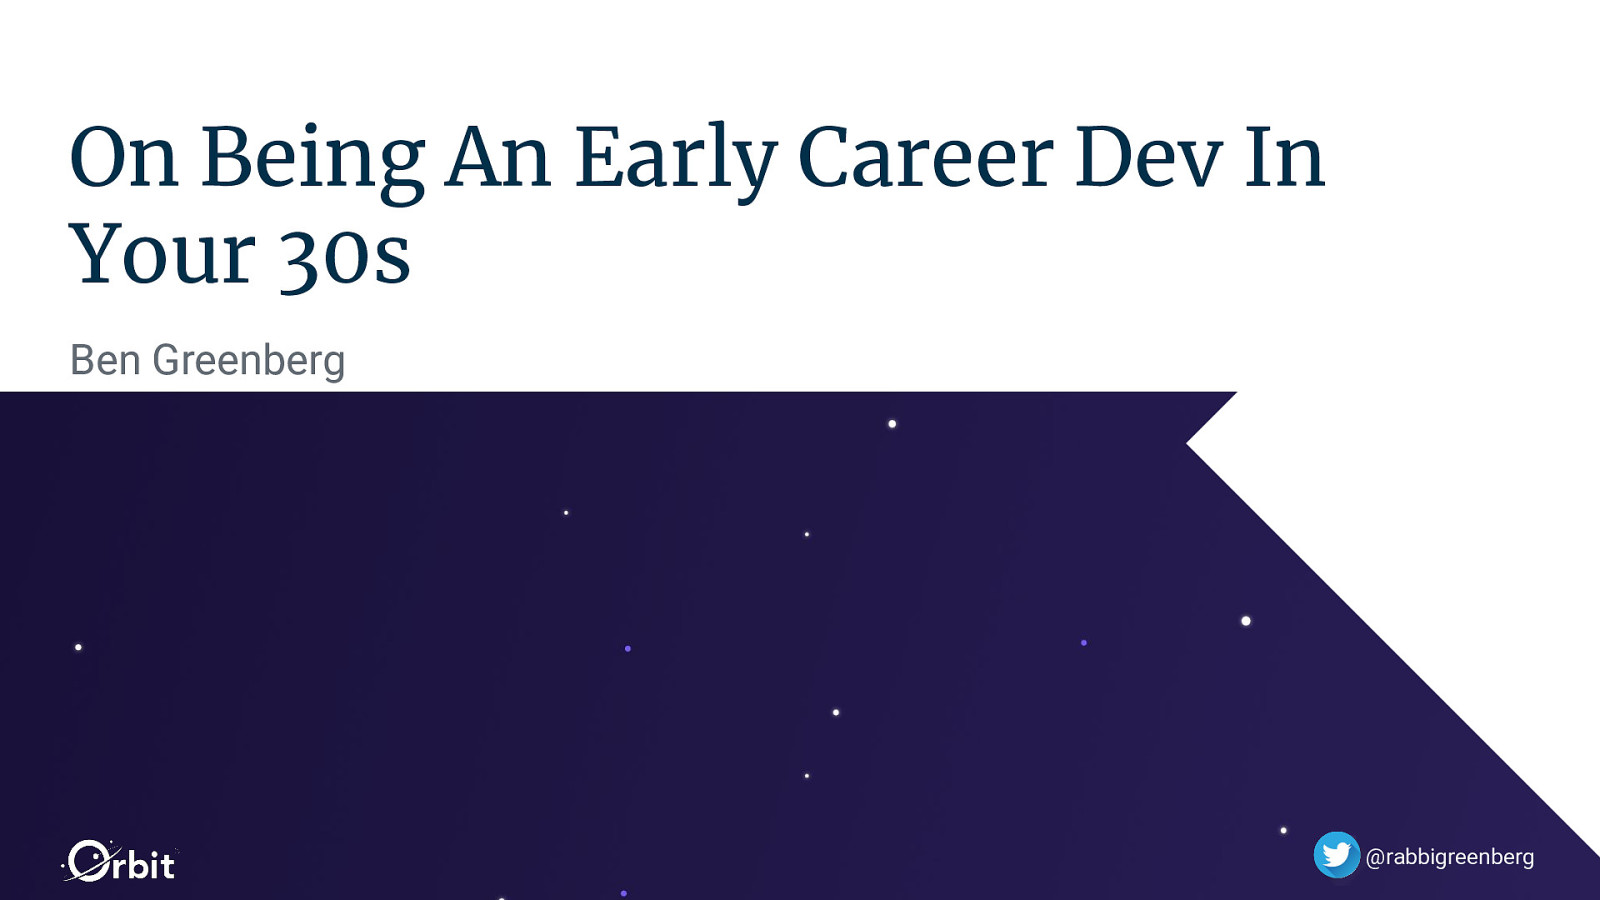 On Being an Early Career Dev in Your 30s